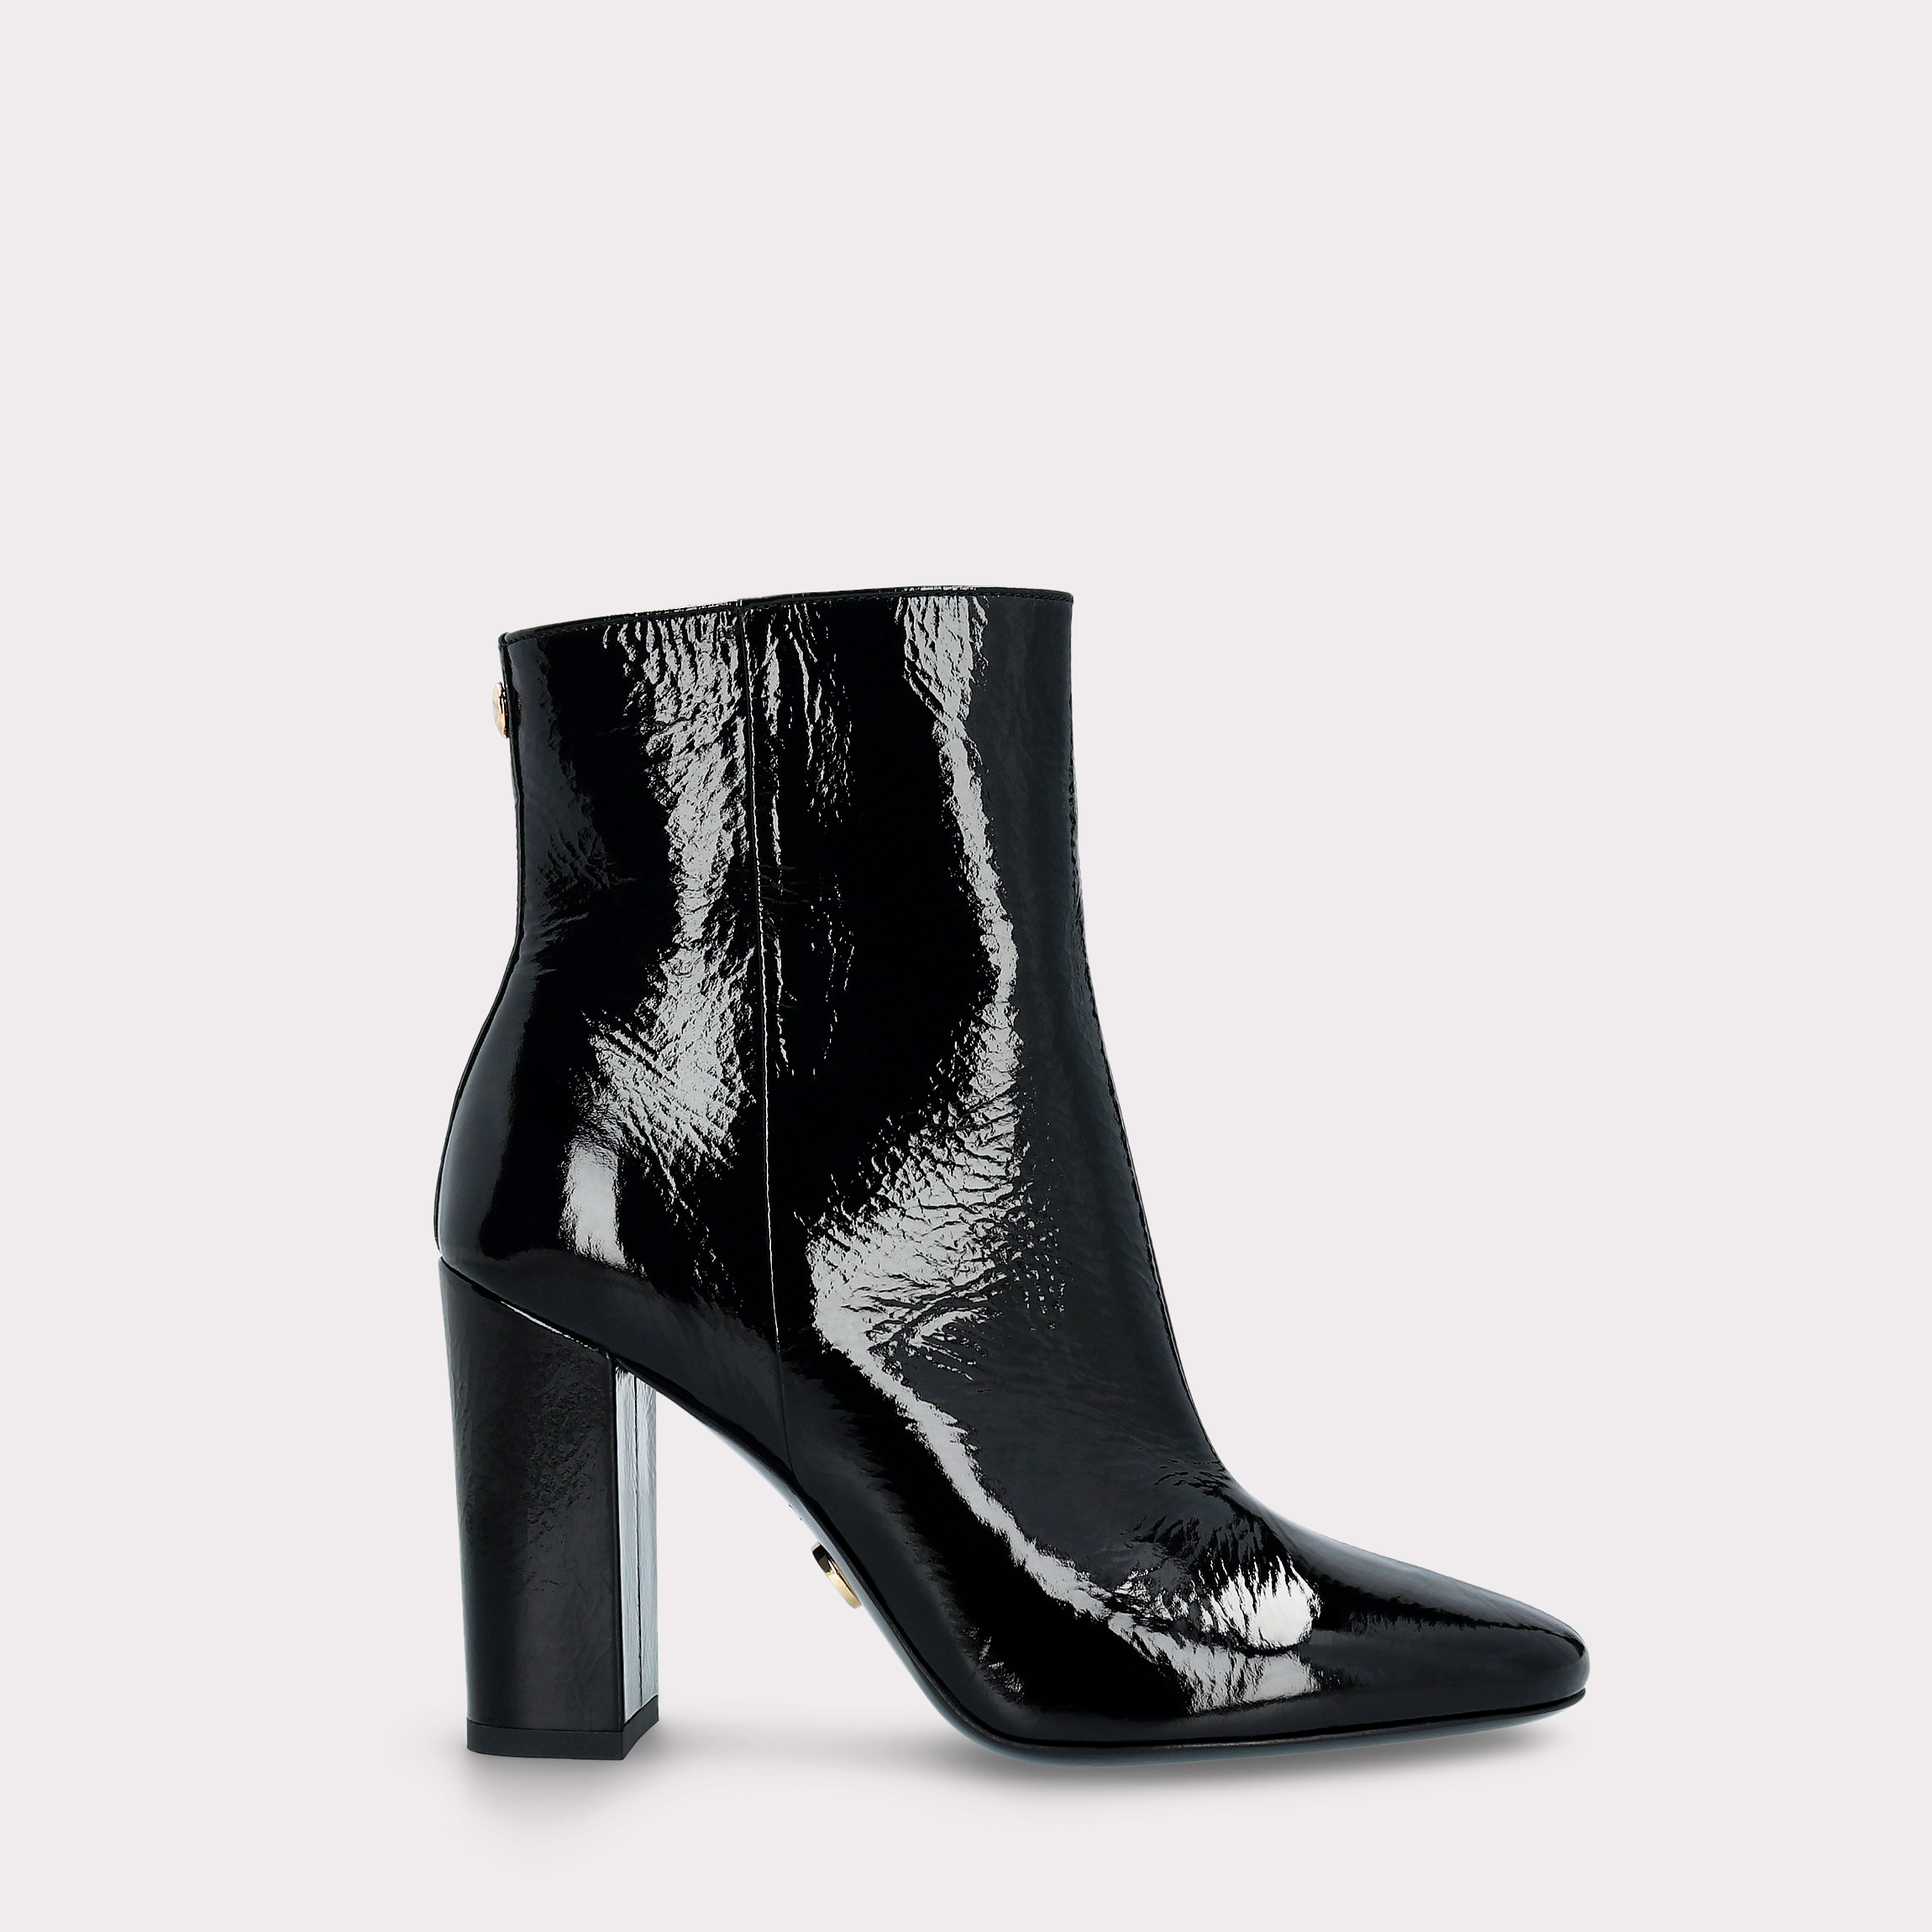 DELMA BLACK CRUSHED PATENT LEATHER ANKLE BOOTS